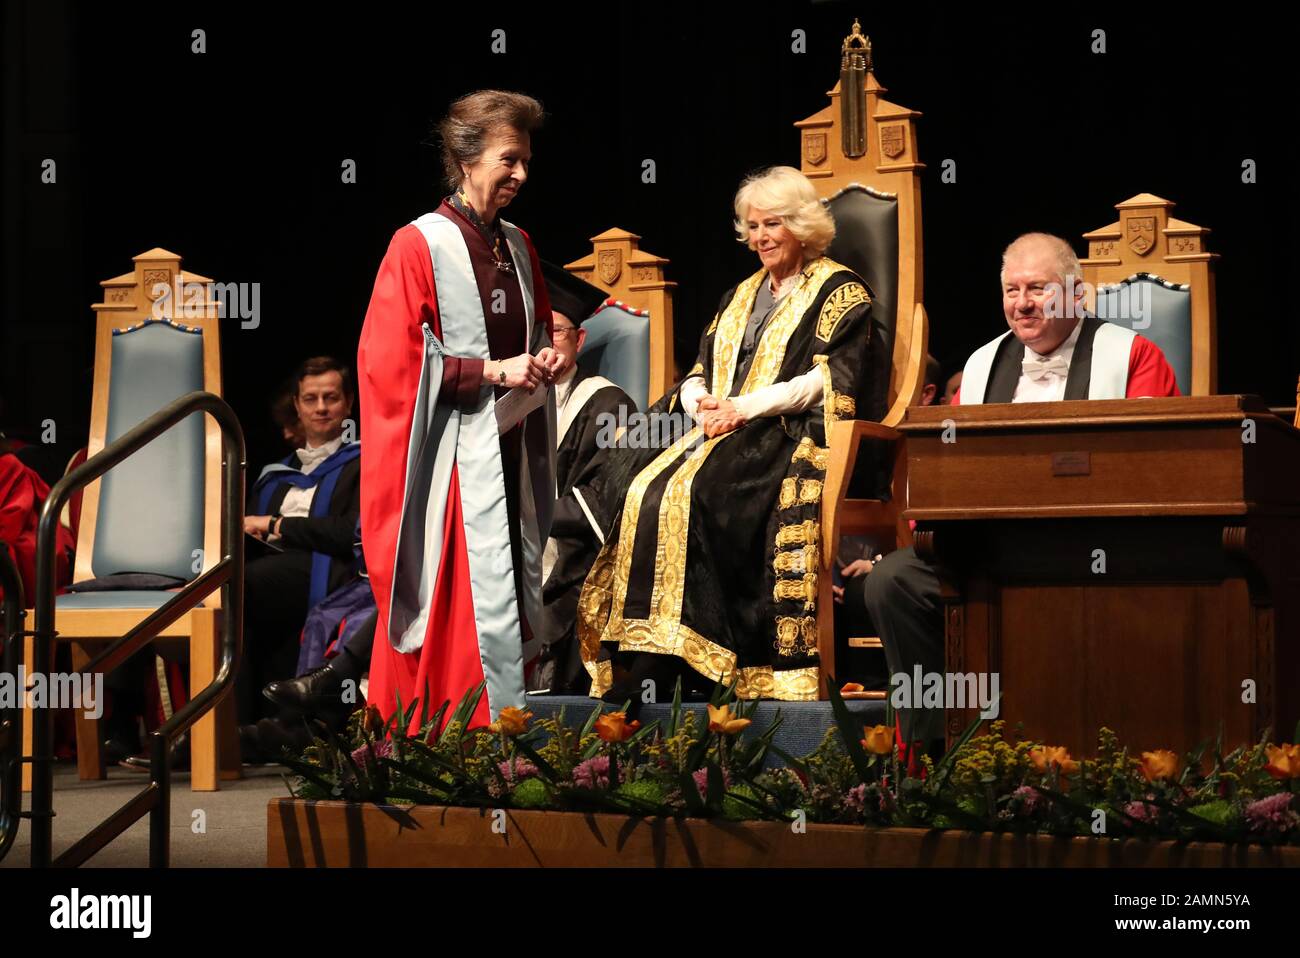 The Duchess of Cornwall (known as the Duchess of Rothesay while in Scotland) presents an honorary degree to her sister-in-law the Princess Royal at the University of Aberdeen. Stock Photo